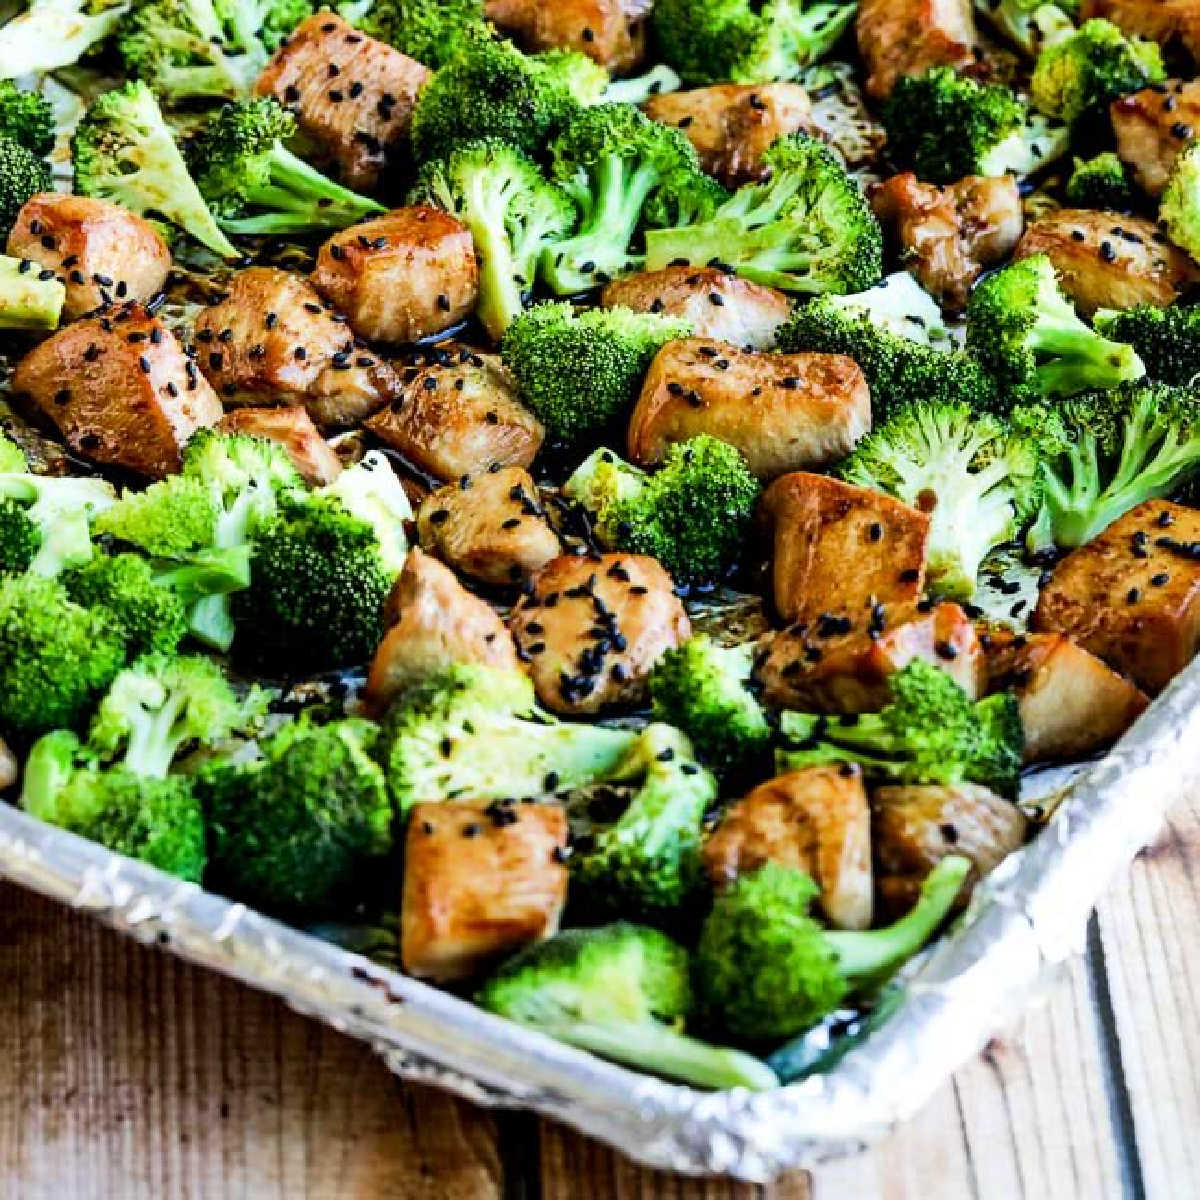 Sesame Chicken and Broccoli Sheet Pan Meal shown on sheet pan lined with foil.